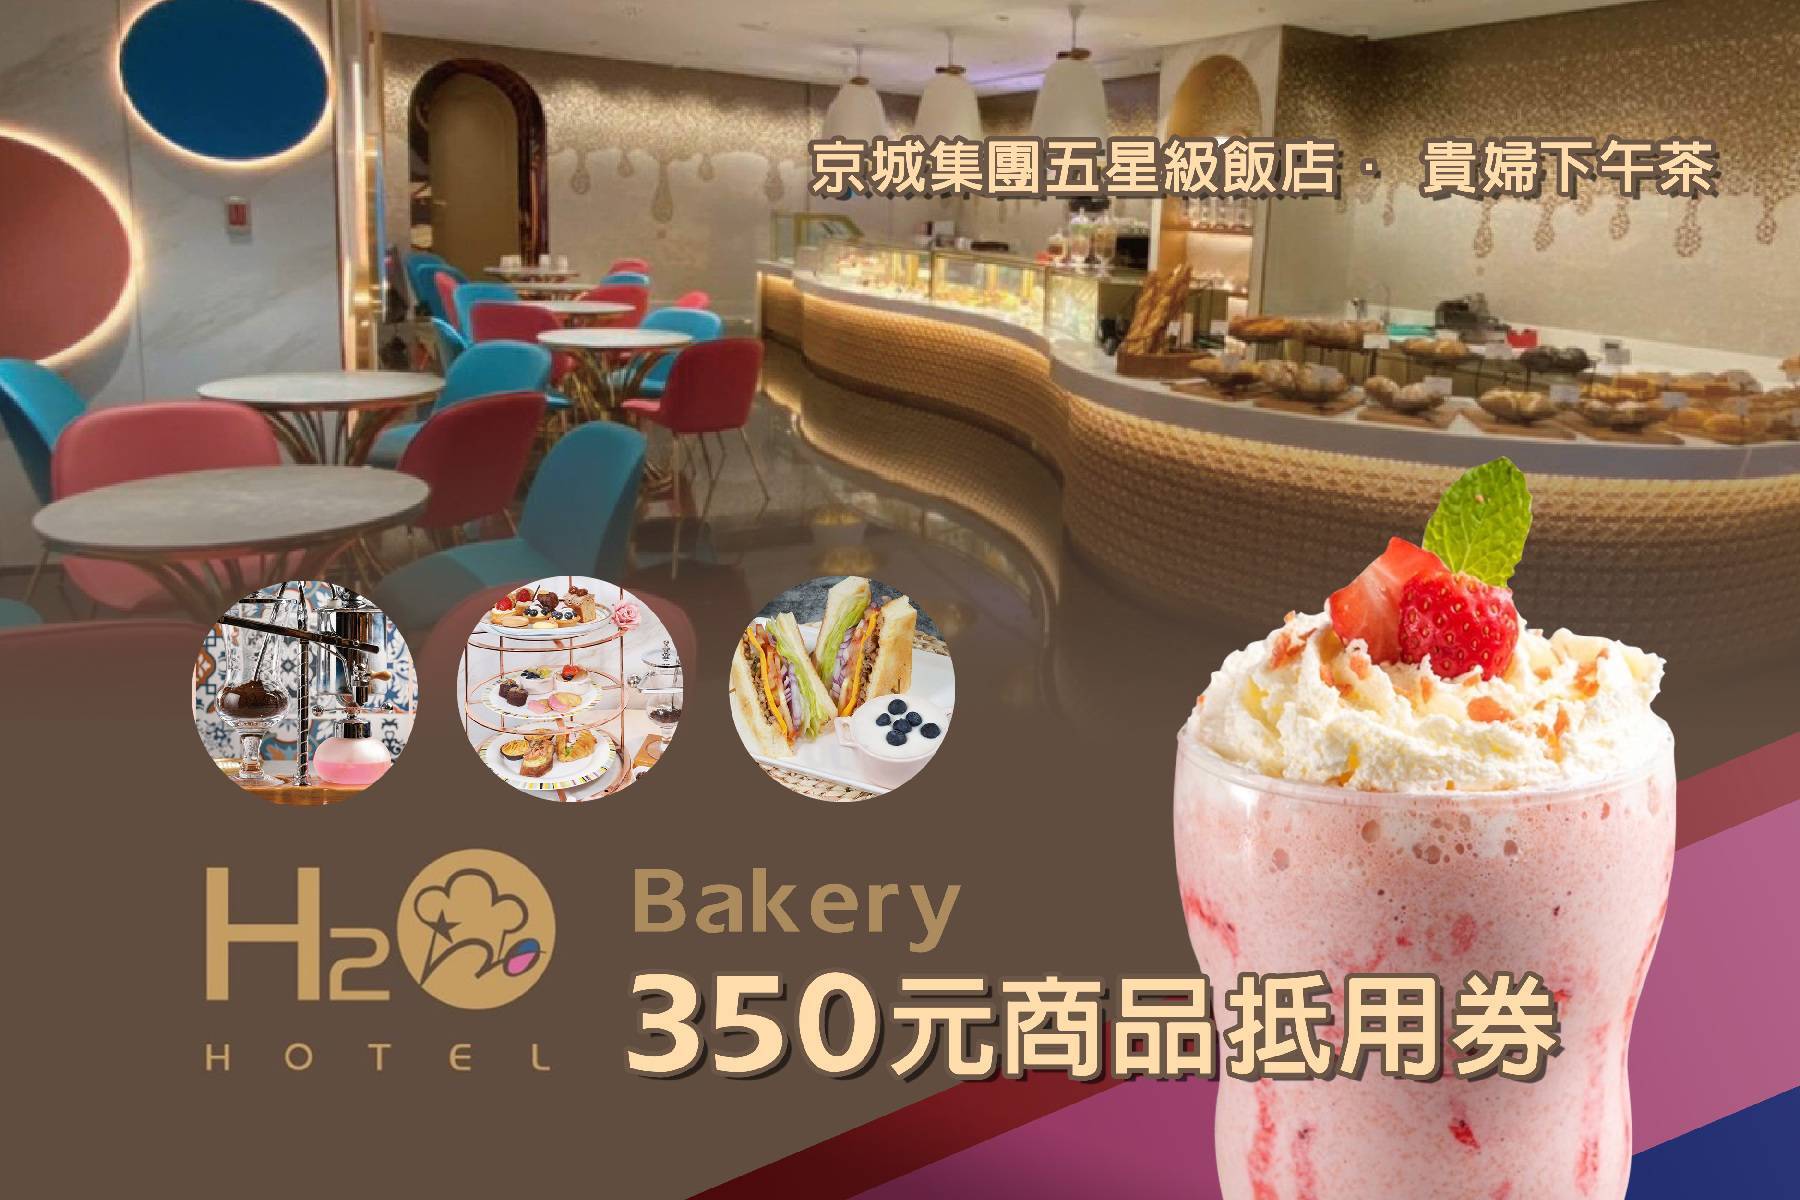 ｜H2O Bakery-350元商品抵用券1